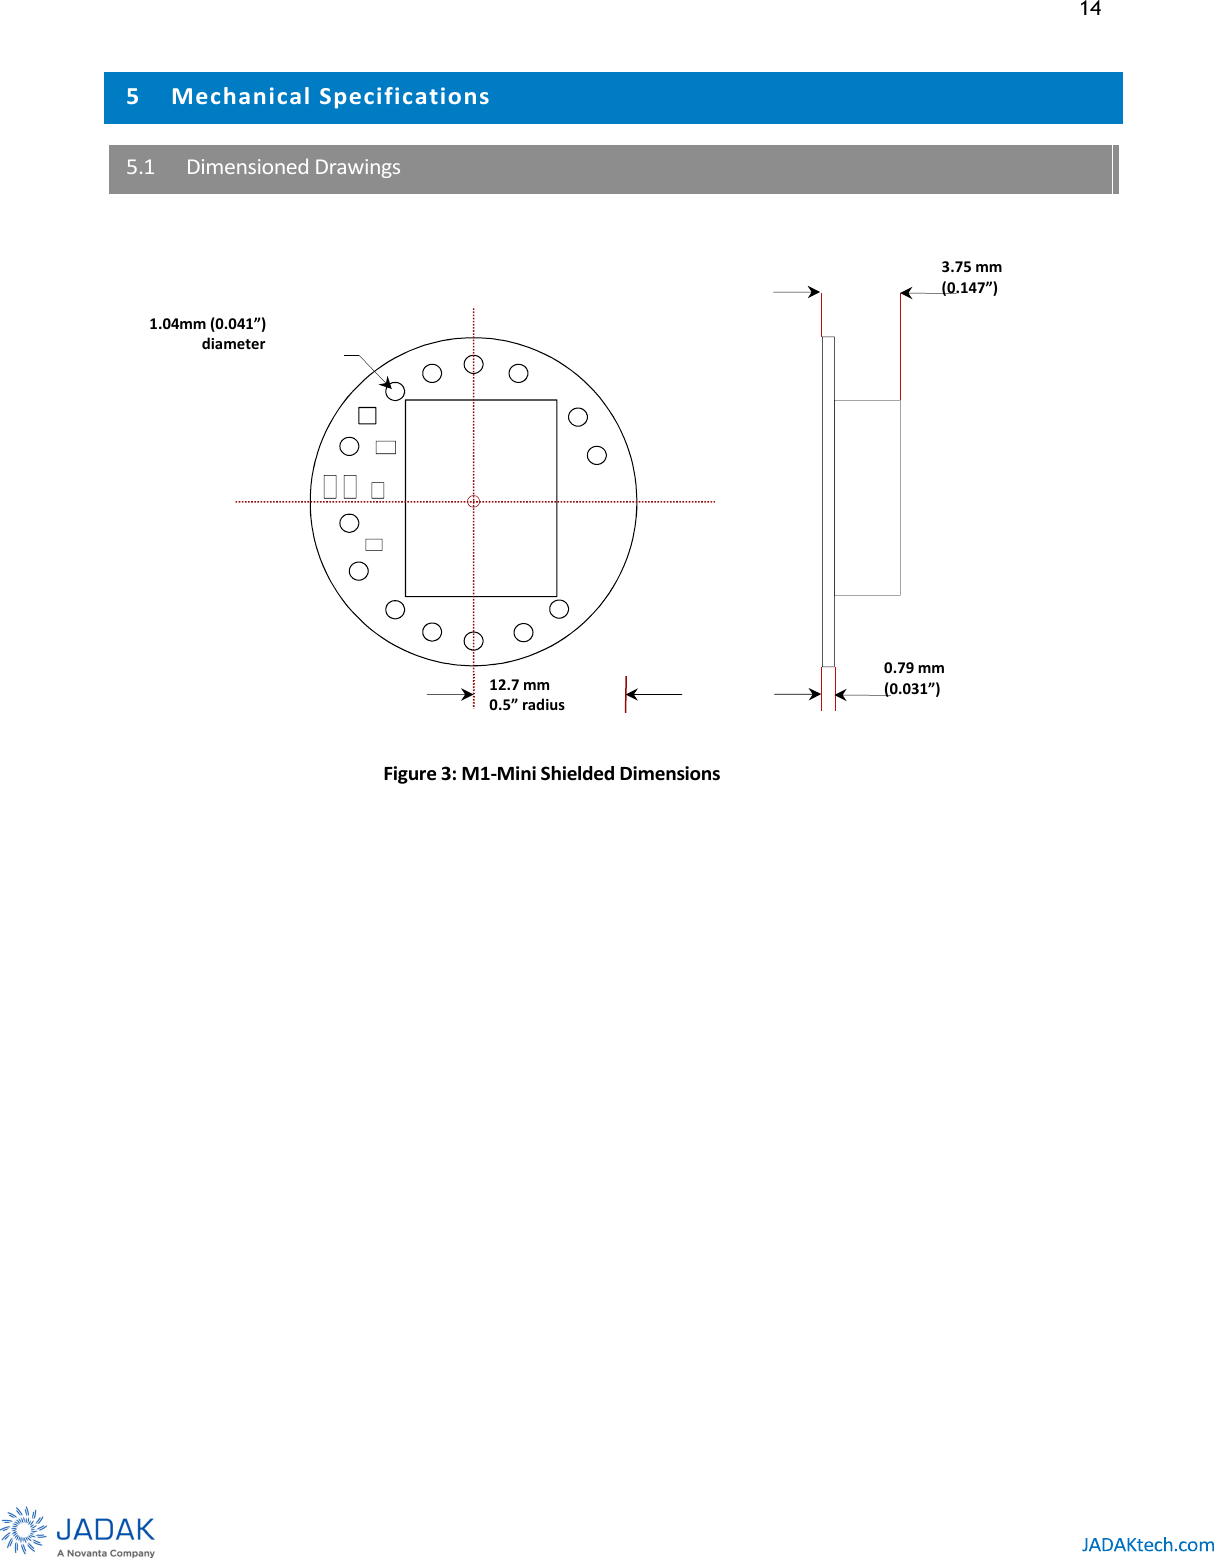 14      5 Mechanical Specifications 5.1 Dimensioned Drawings       Figure 3: M1-Mini Shielded Dimensions 12.7 mm 0.5” radius 1.04mm (0.041”)               diameter 0.79 mm (0.031”) 3.75 mm (0.147”) 